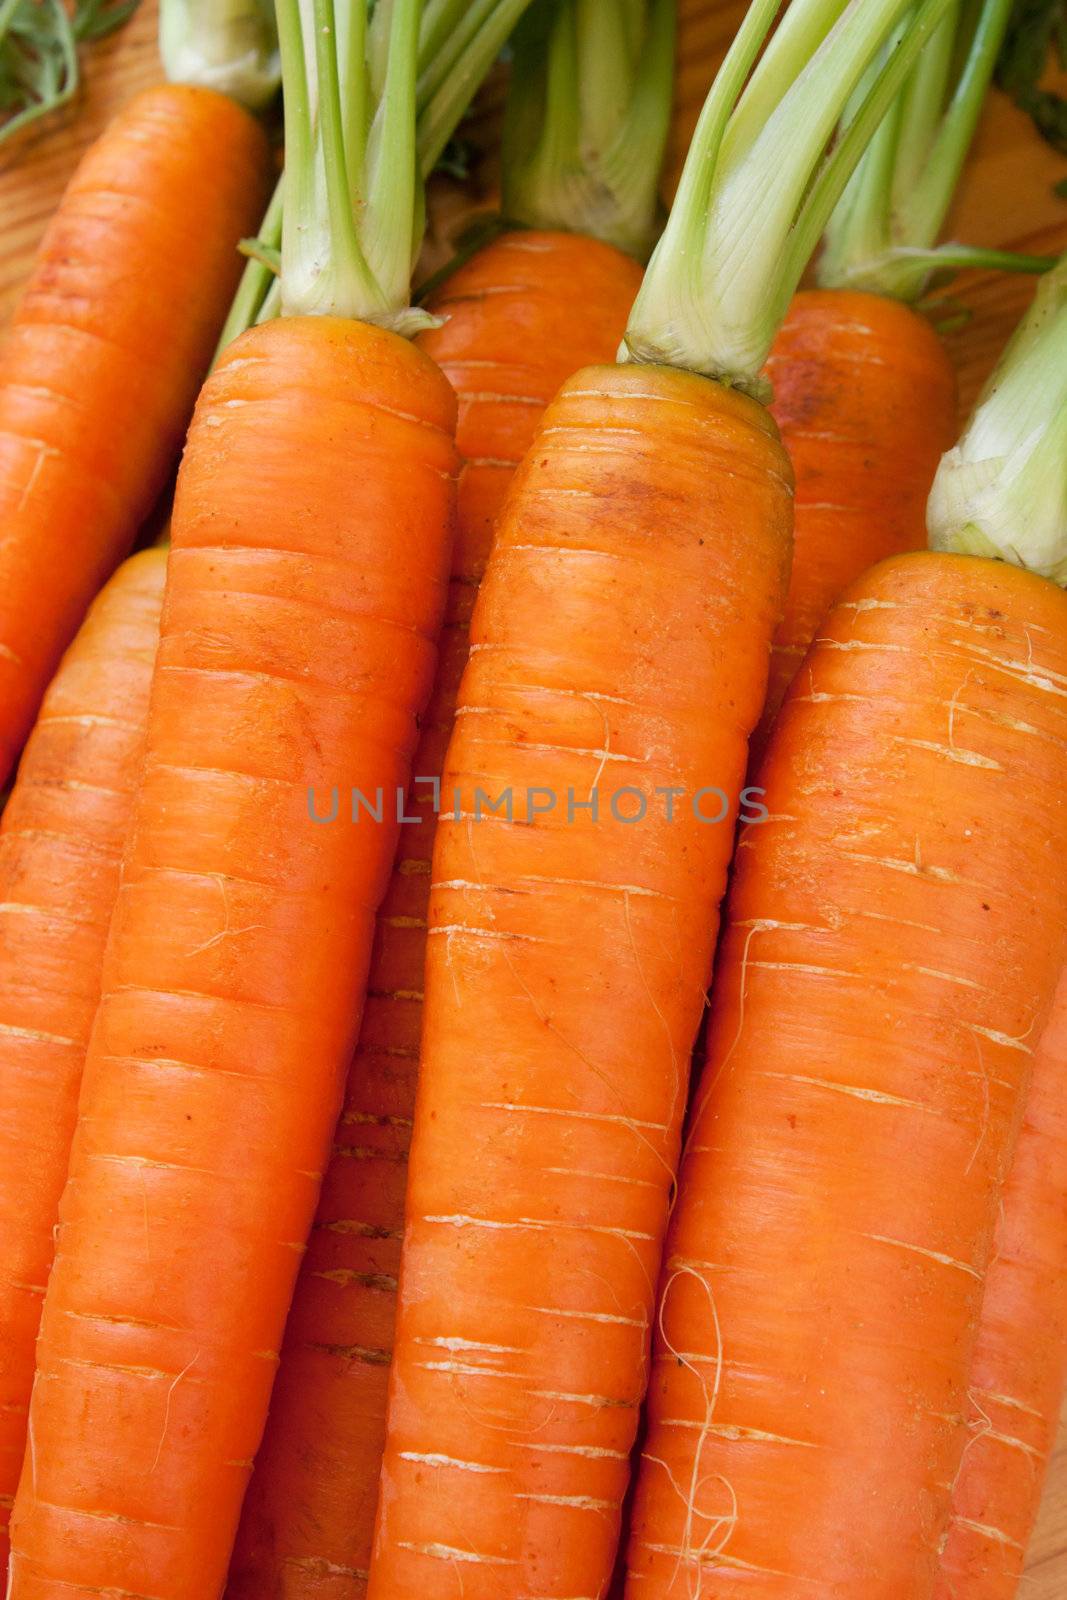 Brunch of fresh carrot with roots, healthy and full of vitamins






Background carott, close up view, for cooking businessBackground carrot, close up view, for cooking business